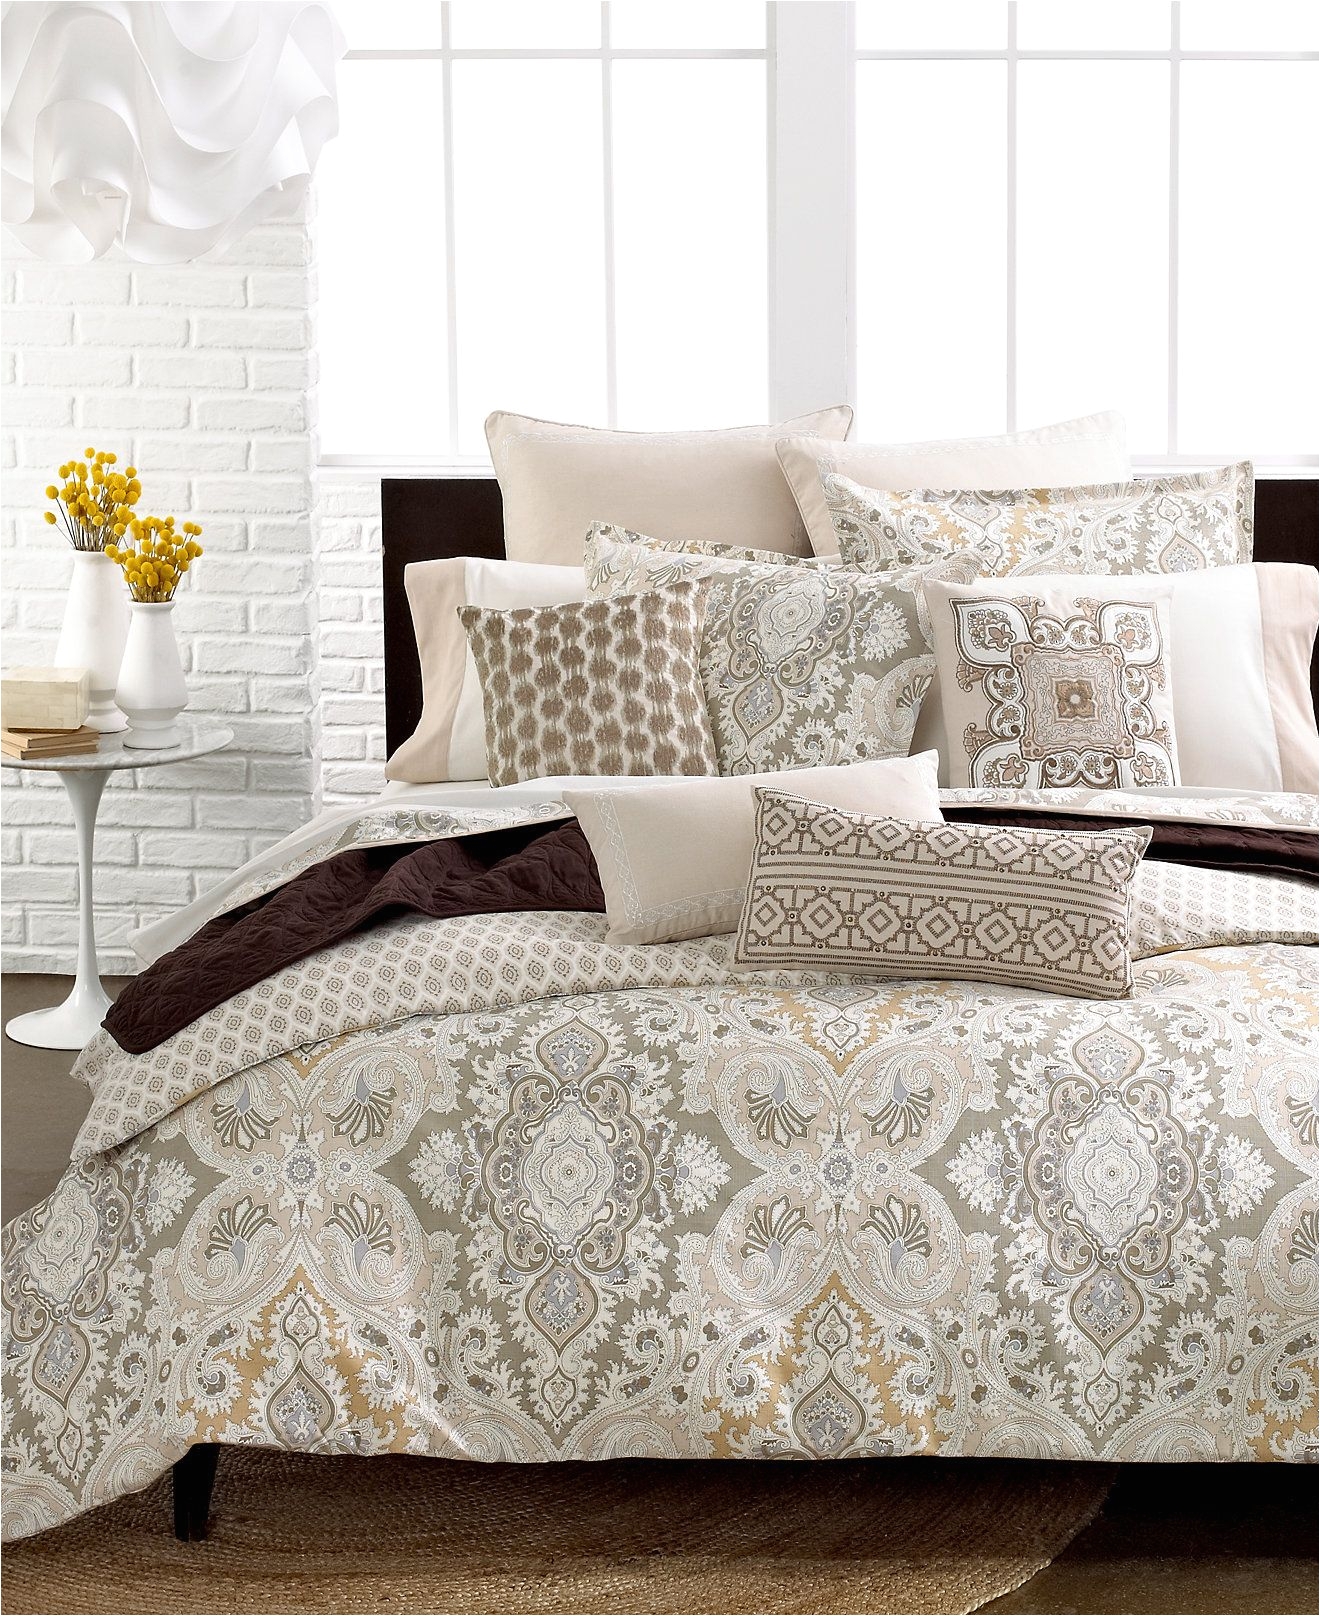 echo odyssey king comforter set bedding collections bed bath macy s